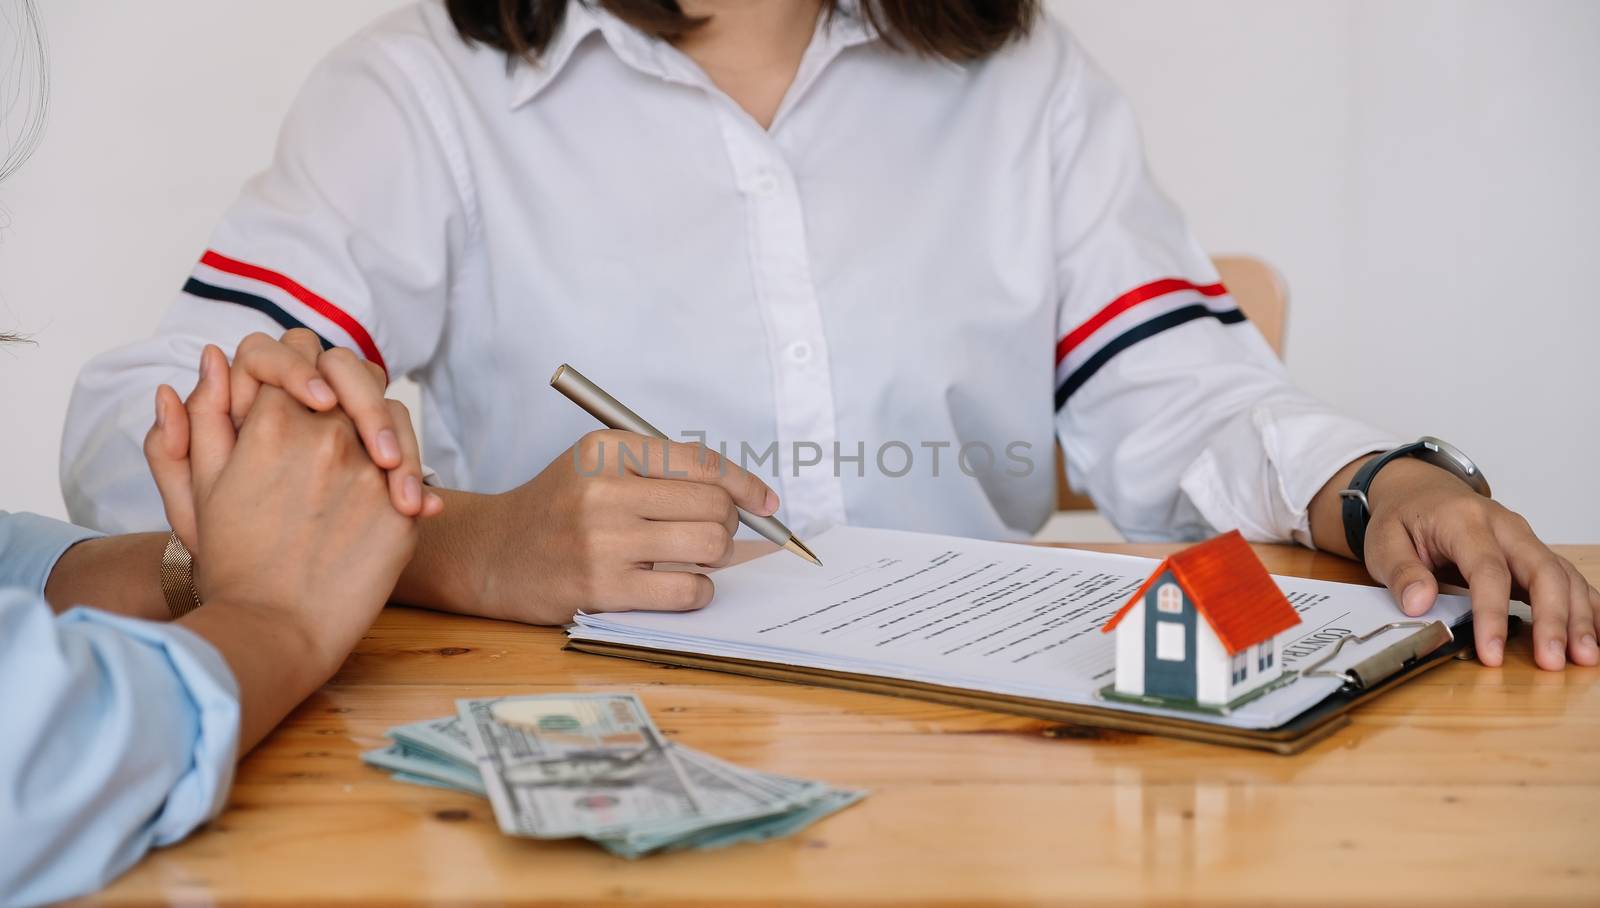 Cropped image of real estate agent assisting client to sign contract paper at desk with house model by nateemee